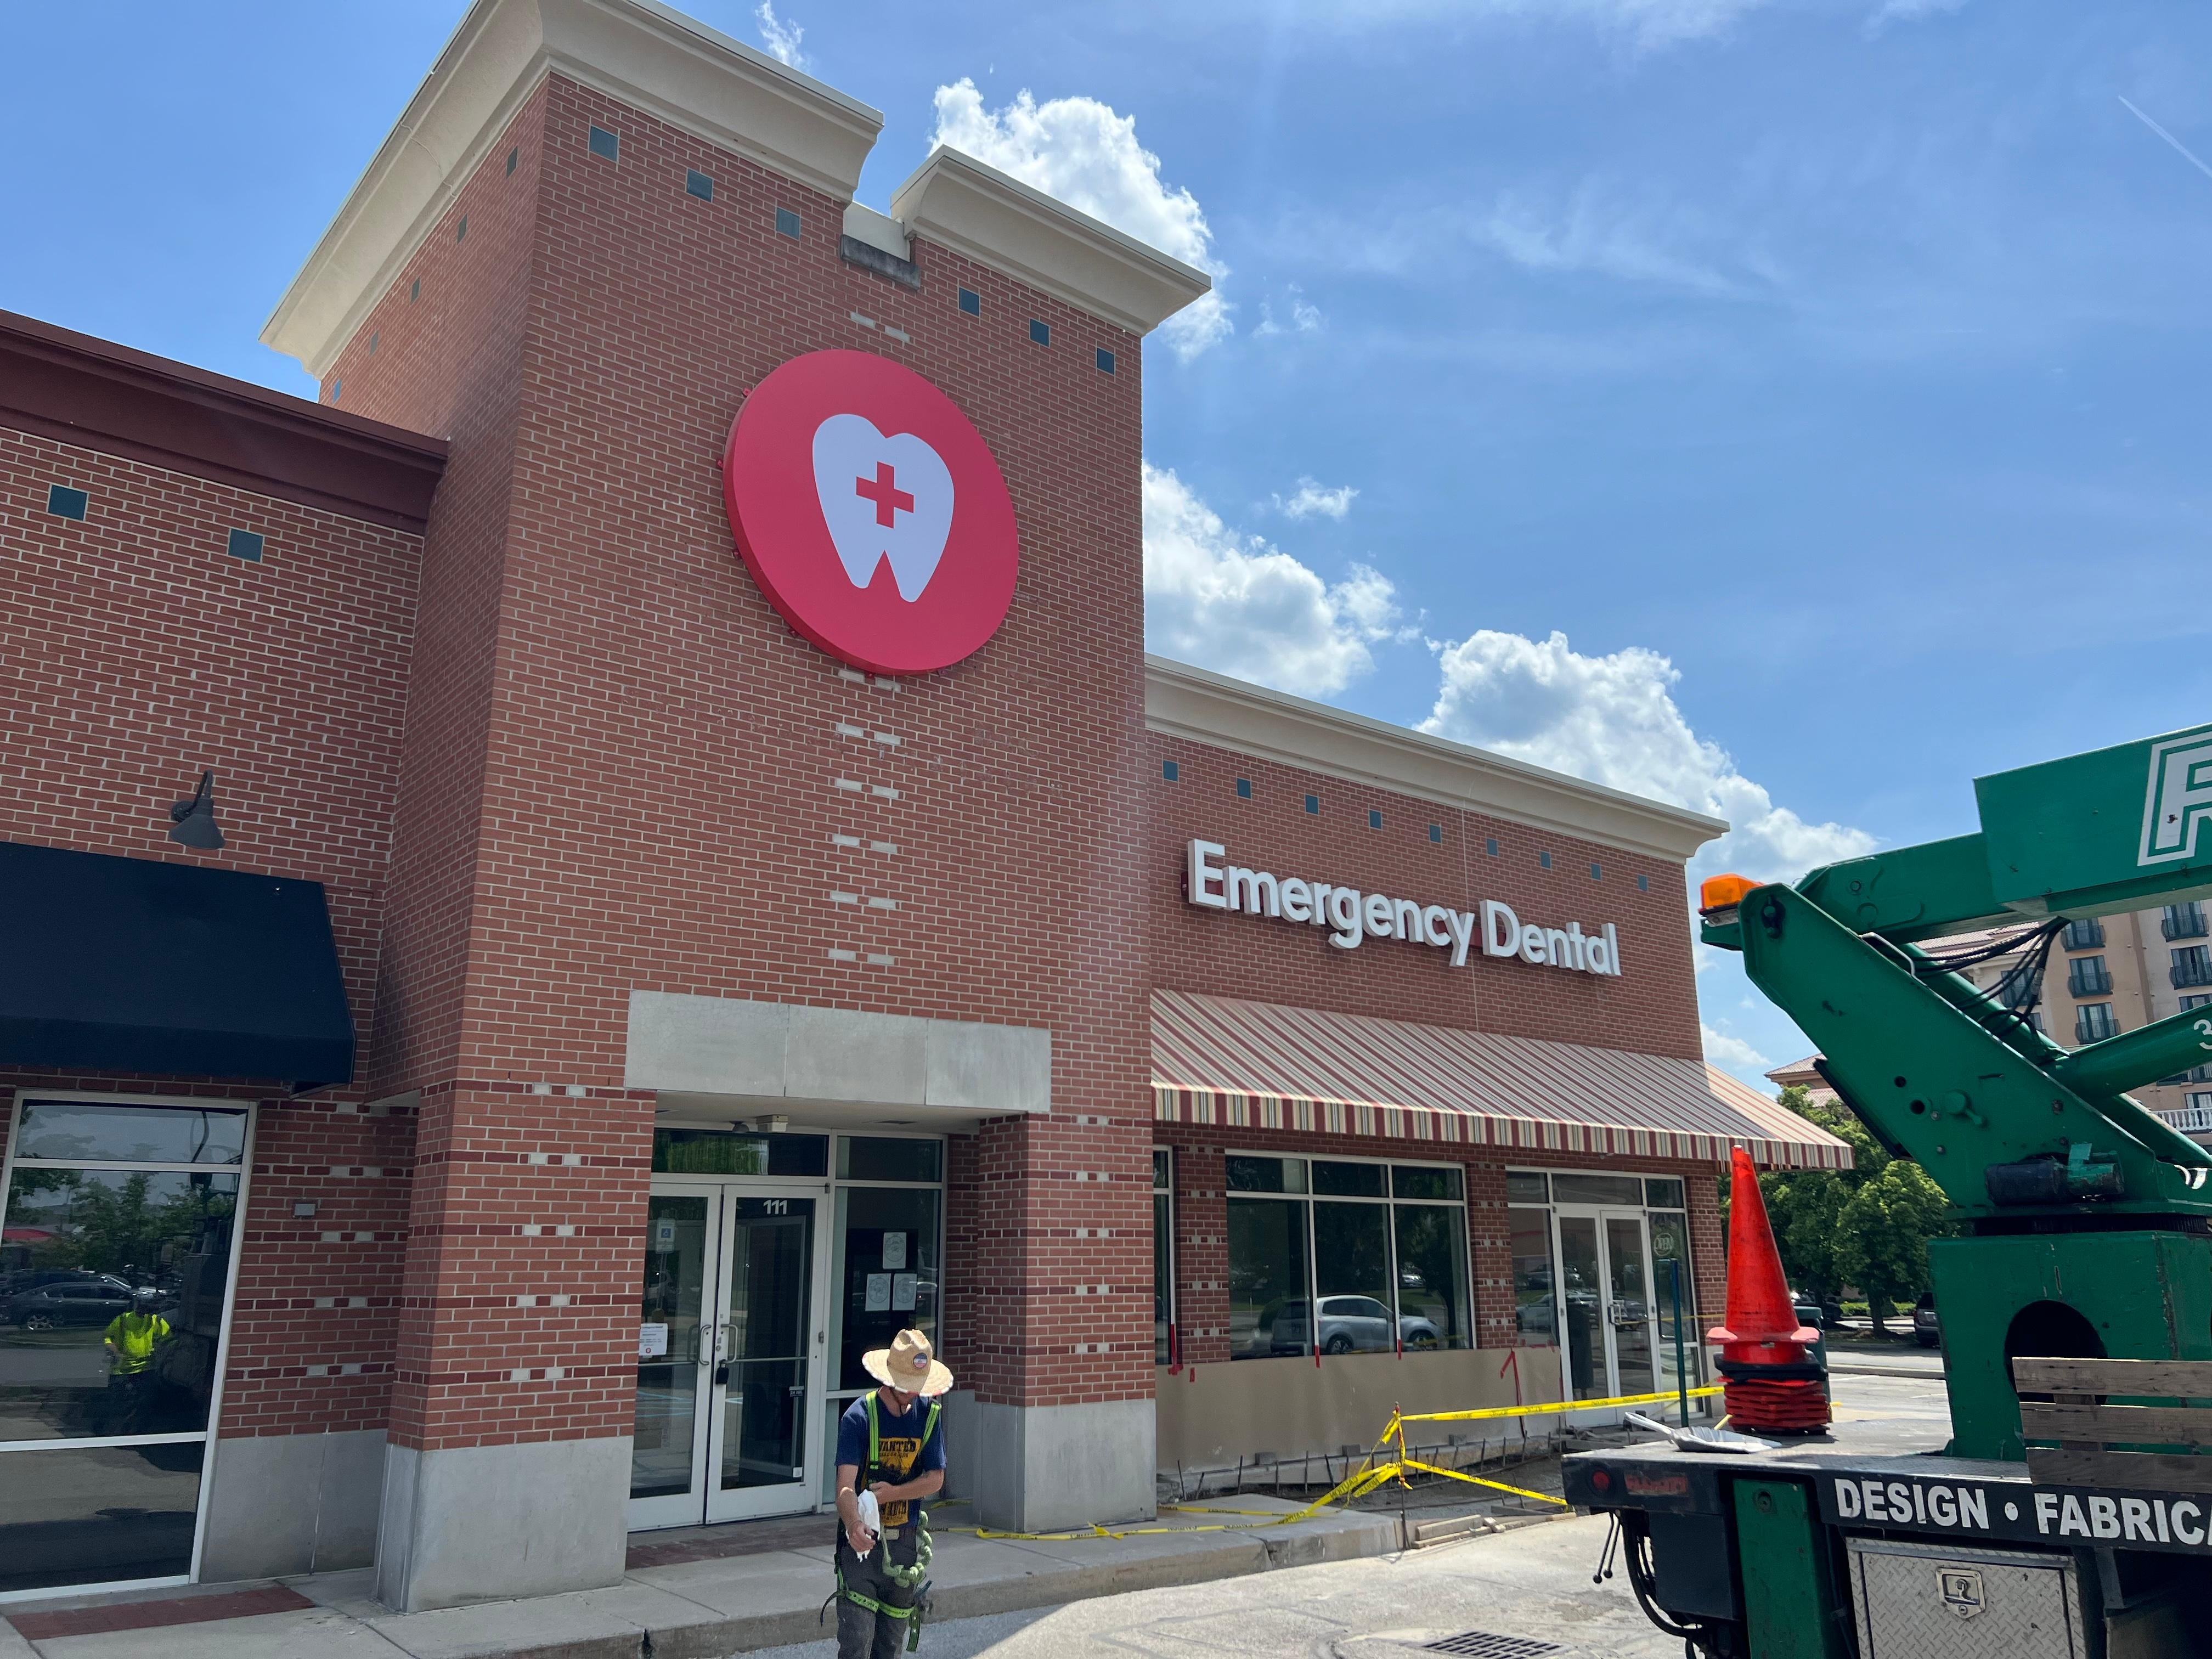 Emergency Dental - Indianapolis, IN 46268 - (317)939-6377 | ShowMeLocal.com